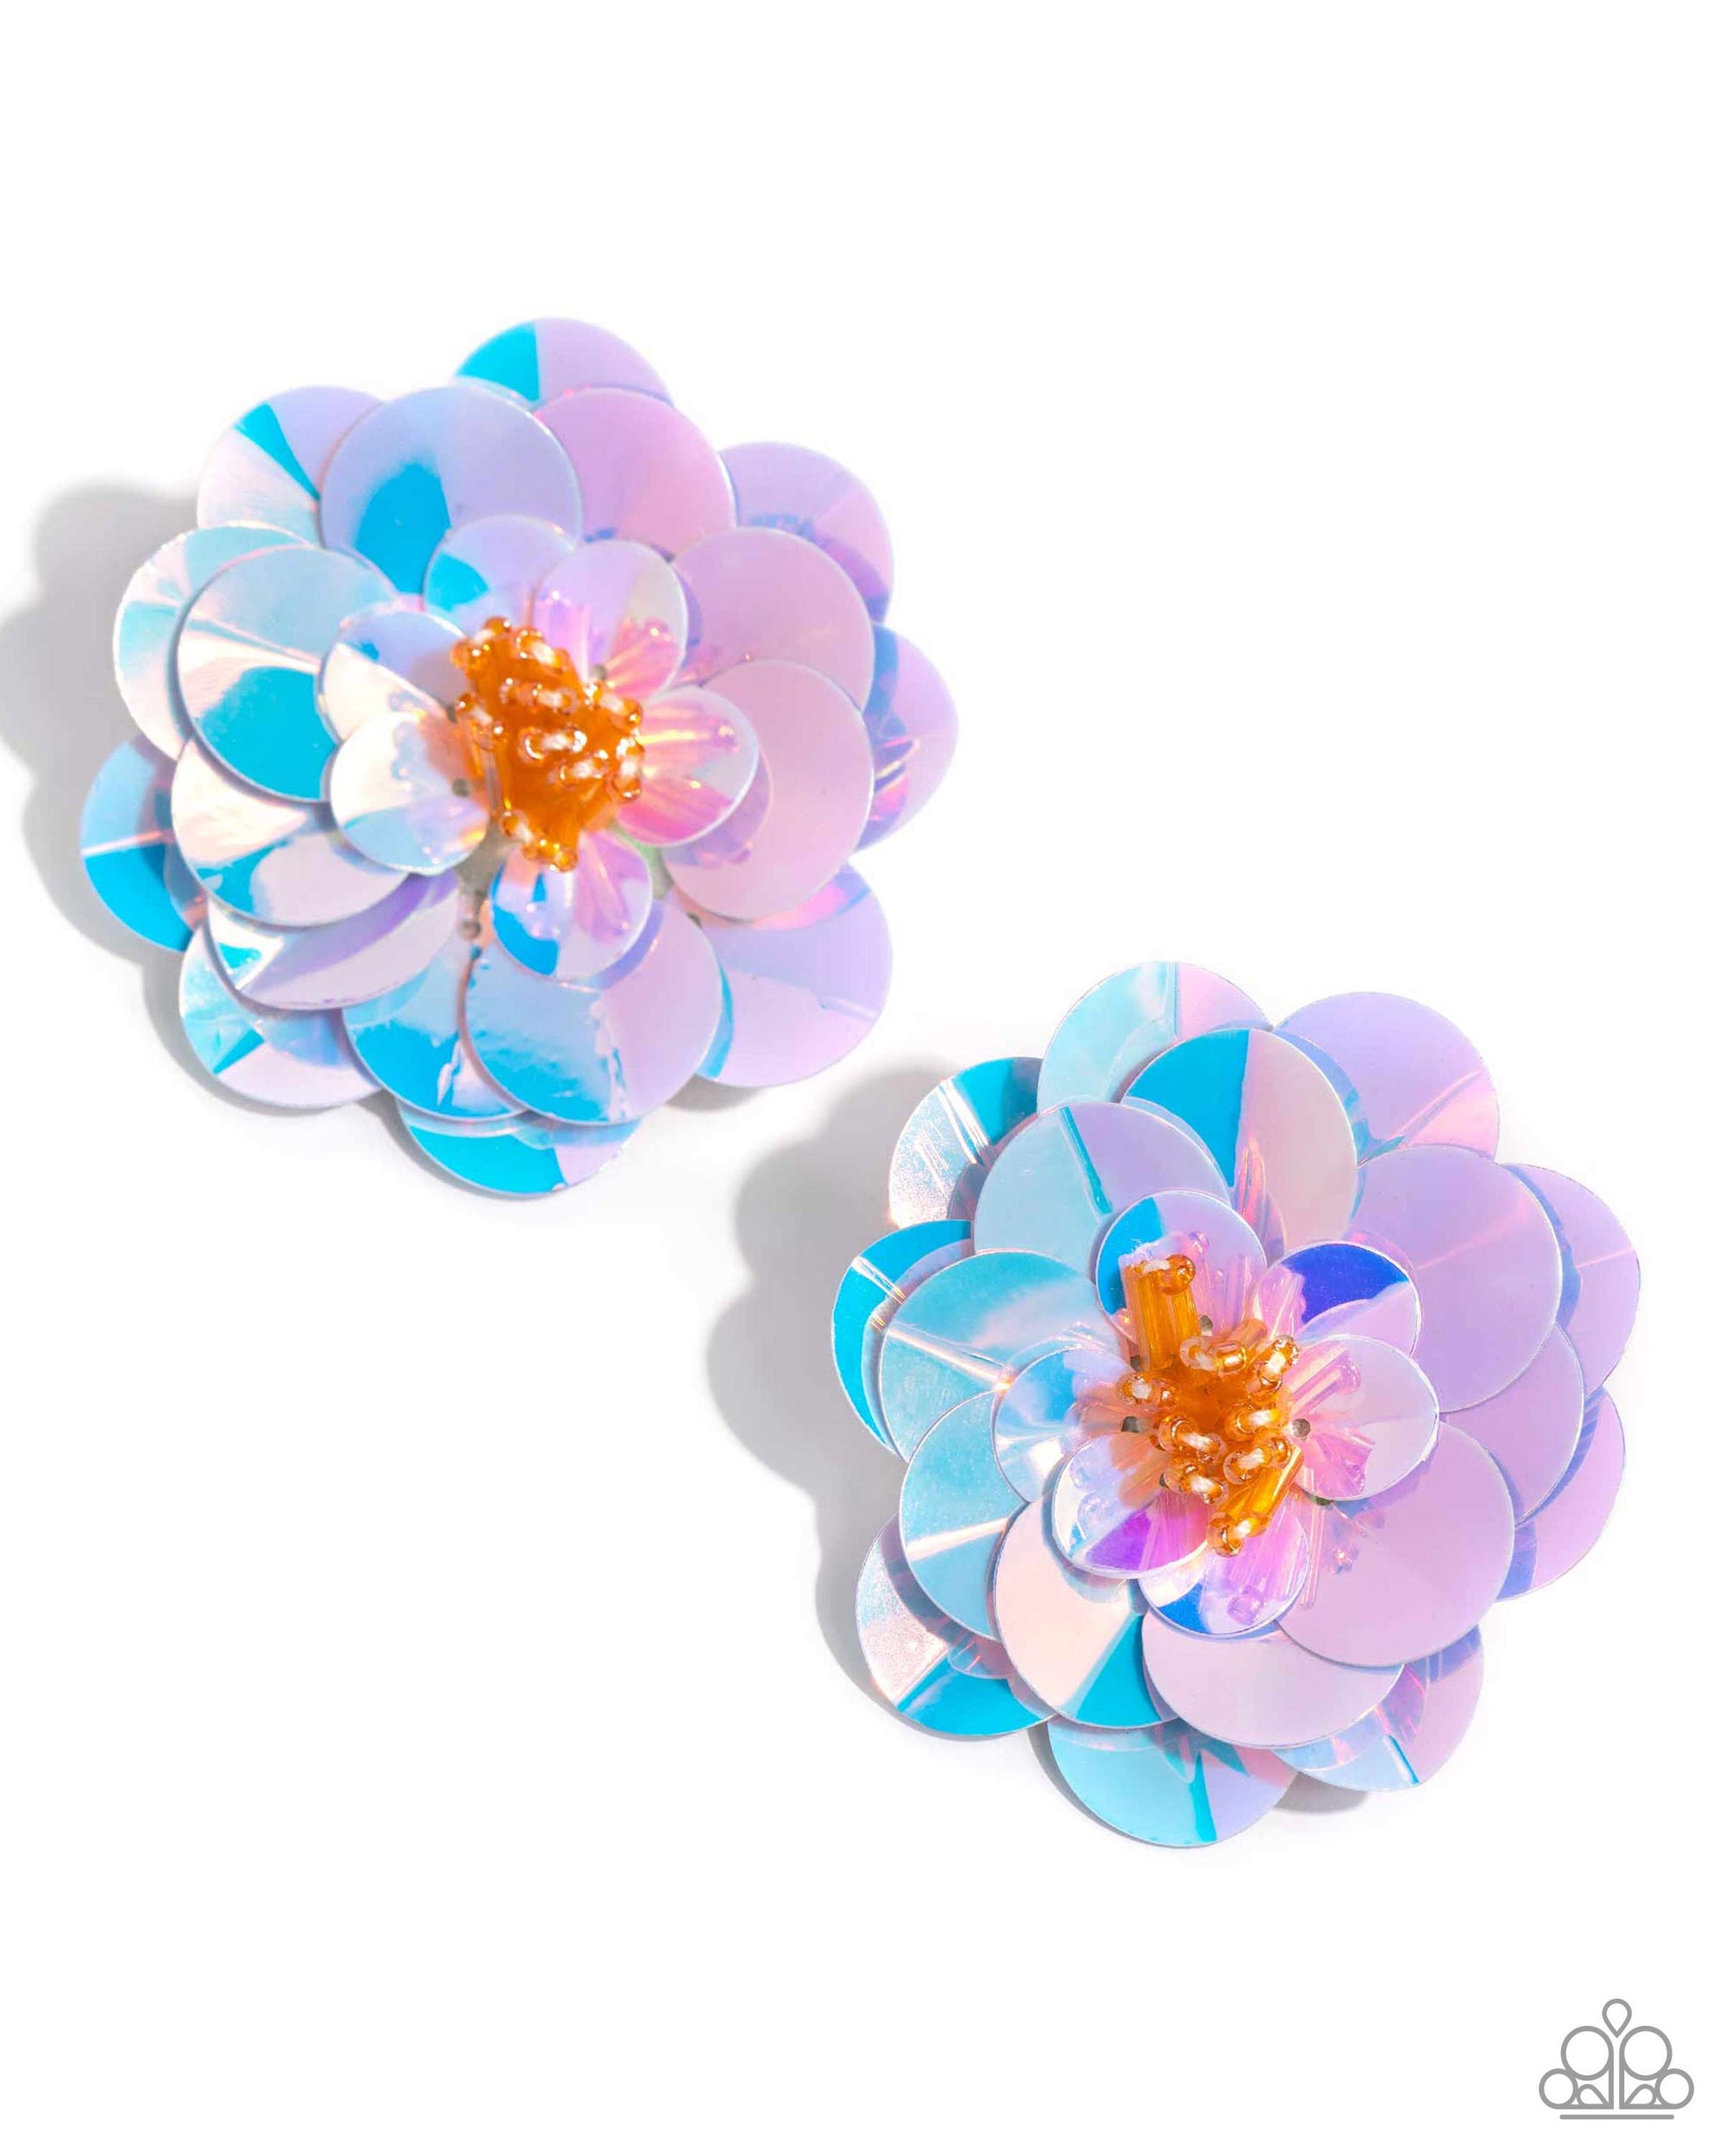 Floating Florals Multi Sequin Flower Earrings - Paparazzi Accessories- lightbox - CarasShop.com - $5 Jewelry by Cara Jewels